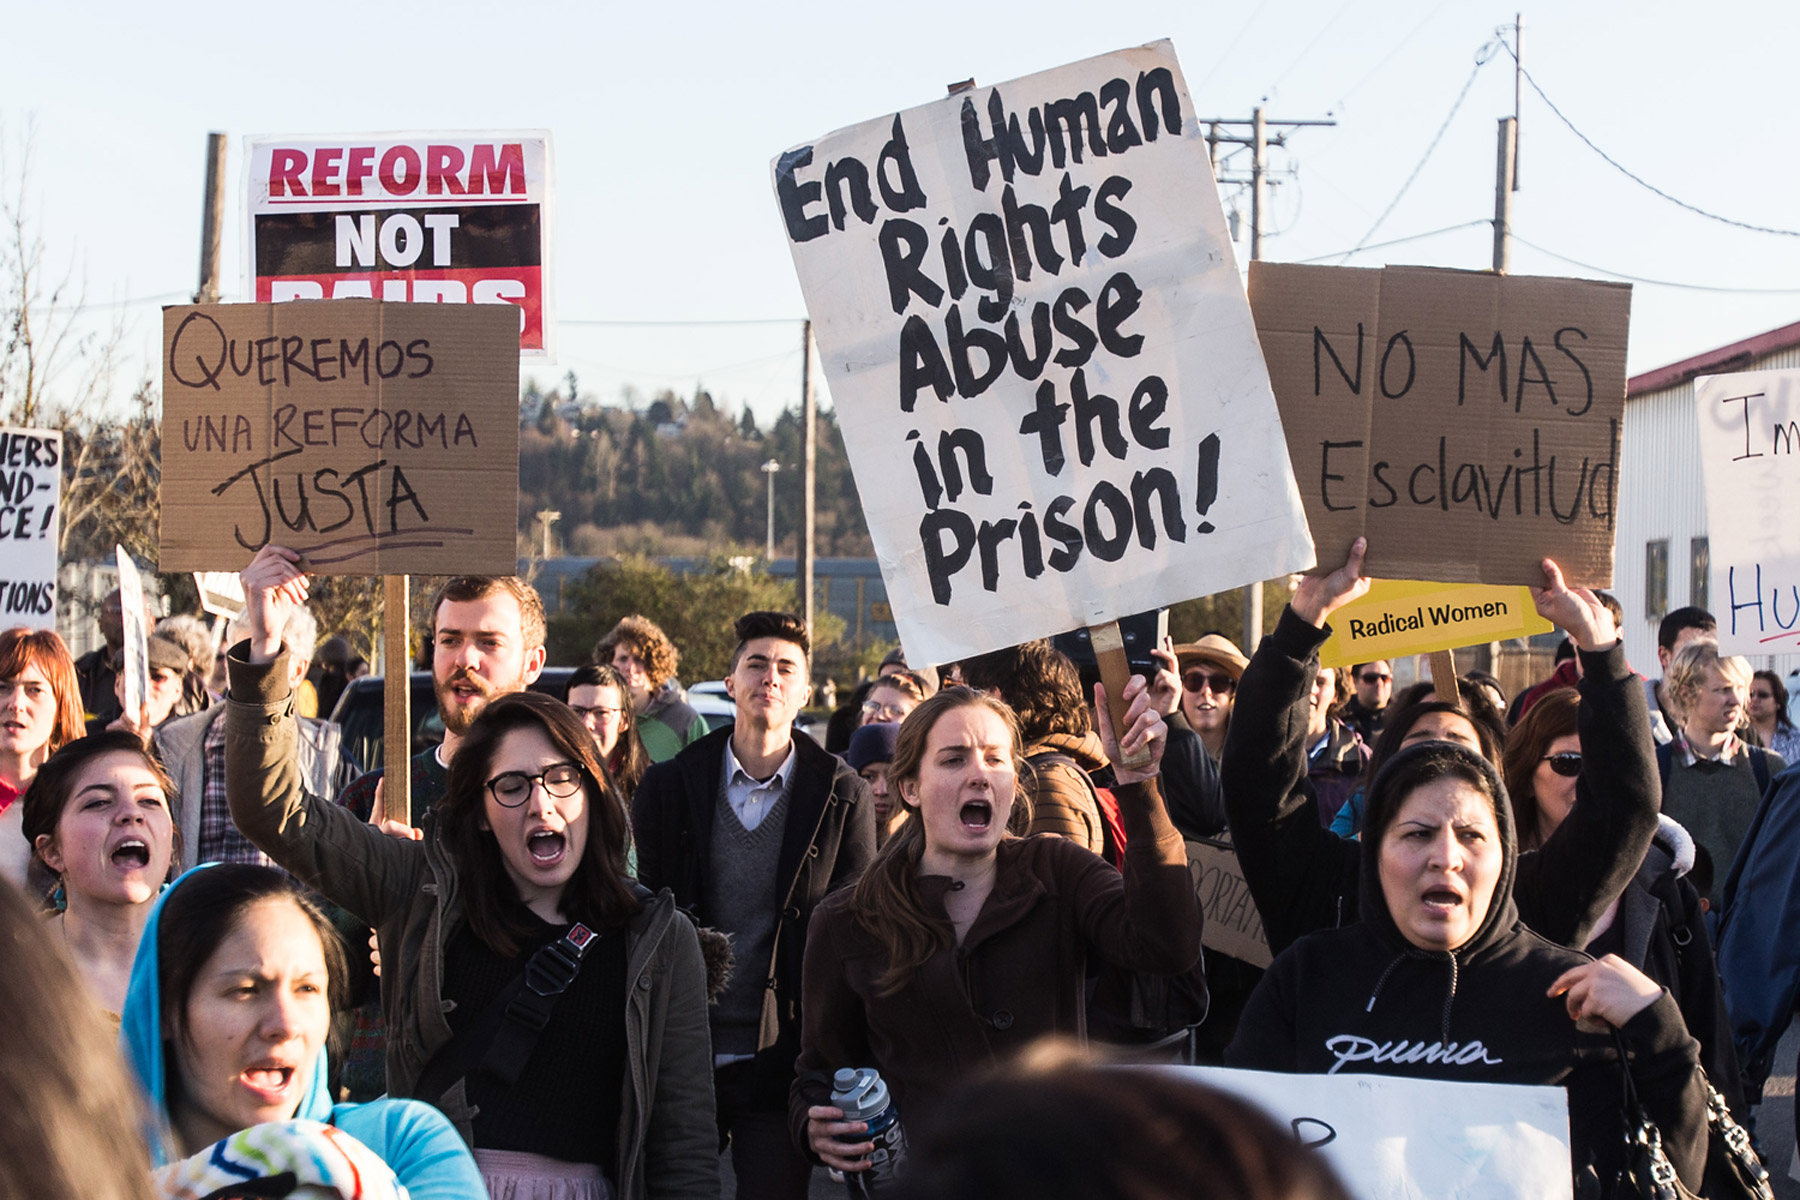 Demonstrators opposing deportations hold up signs while chanting in English and Spanish outside of the Northwest Detention Center in Tacoma, Wa. on March 11, 2014. (Thomas Soerenes—The News Tribune/AP)